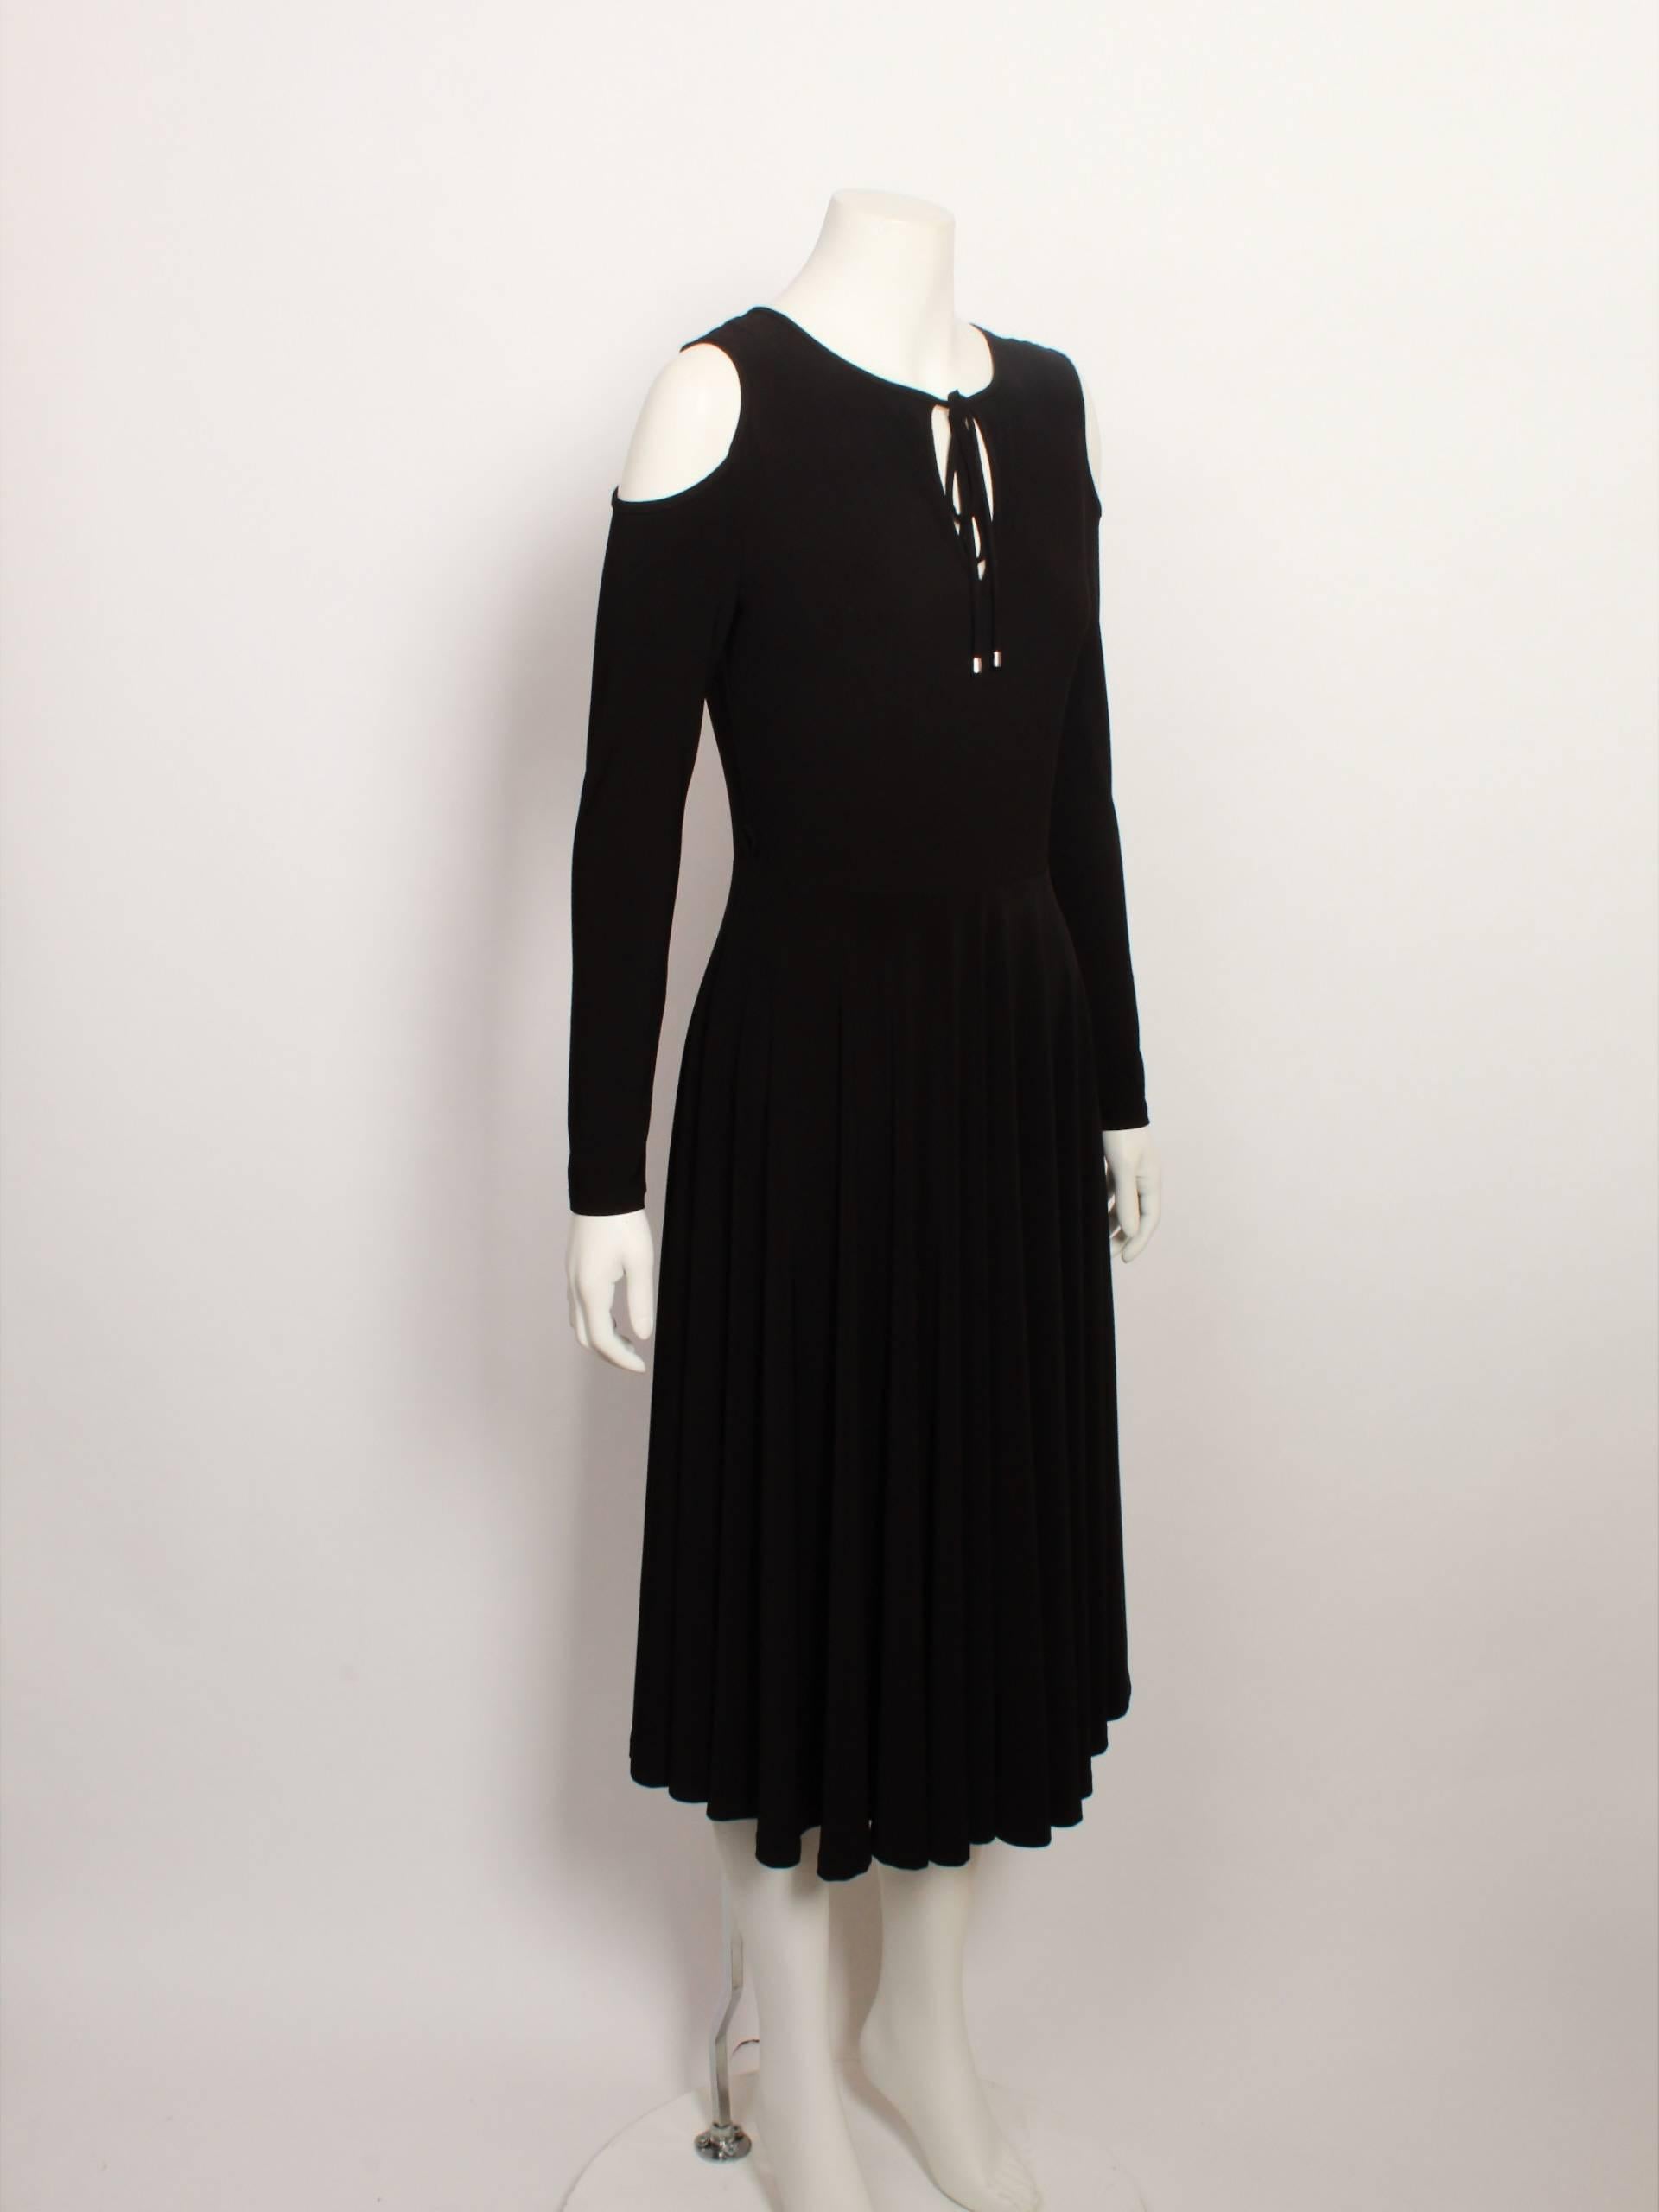 Roksanda is a Serbian designer based in London & a graduate of Central Saint Martins well known for her simplicity and elegant designs. 

This black stretch dress offers a decidedly modest approach to peek-a-boo detailing with a small keyhole cut